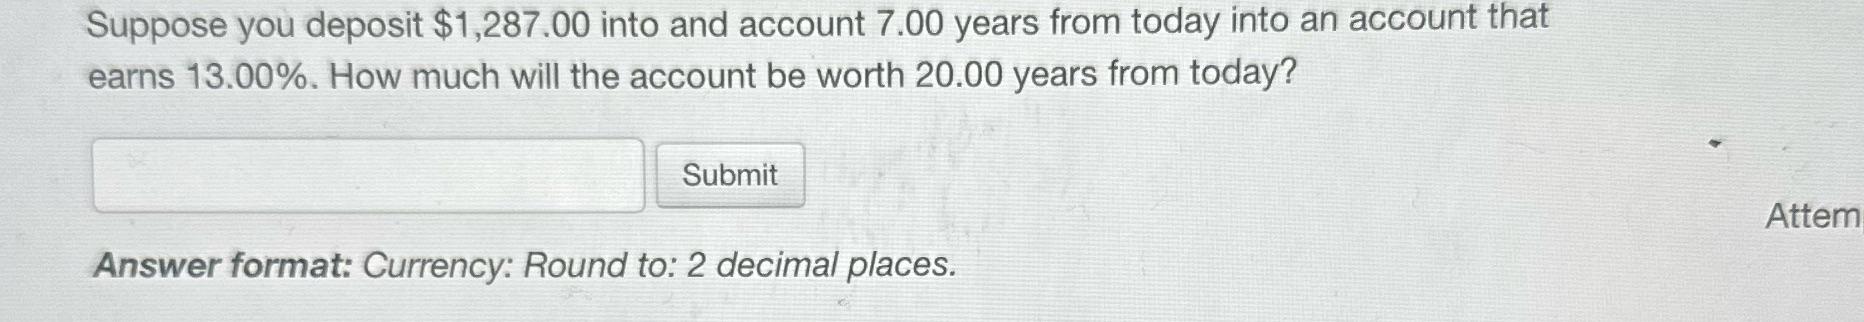 Suppose you deposit $1,287.00 into and account 7.00 years from today into an account that earns 13.00%. How